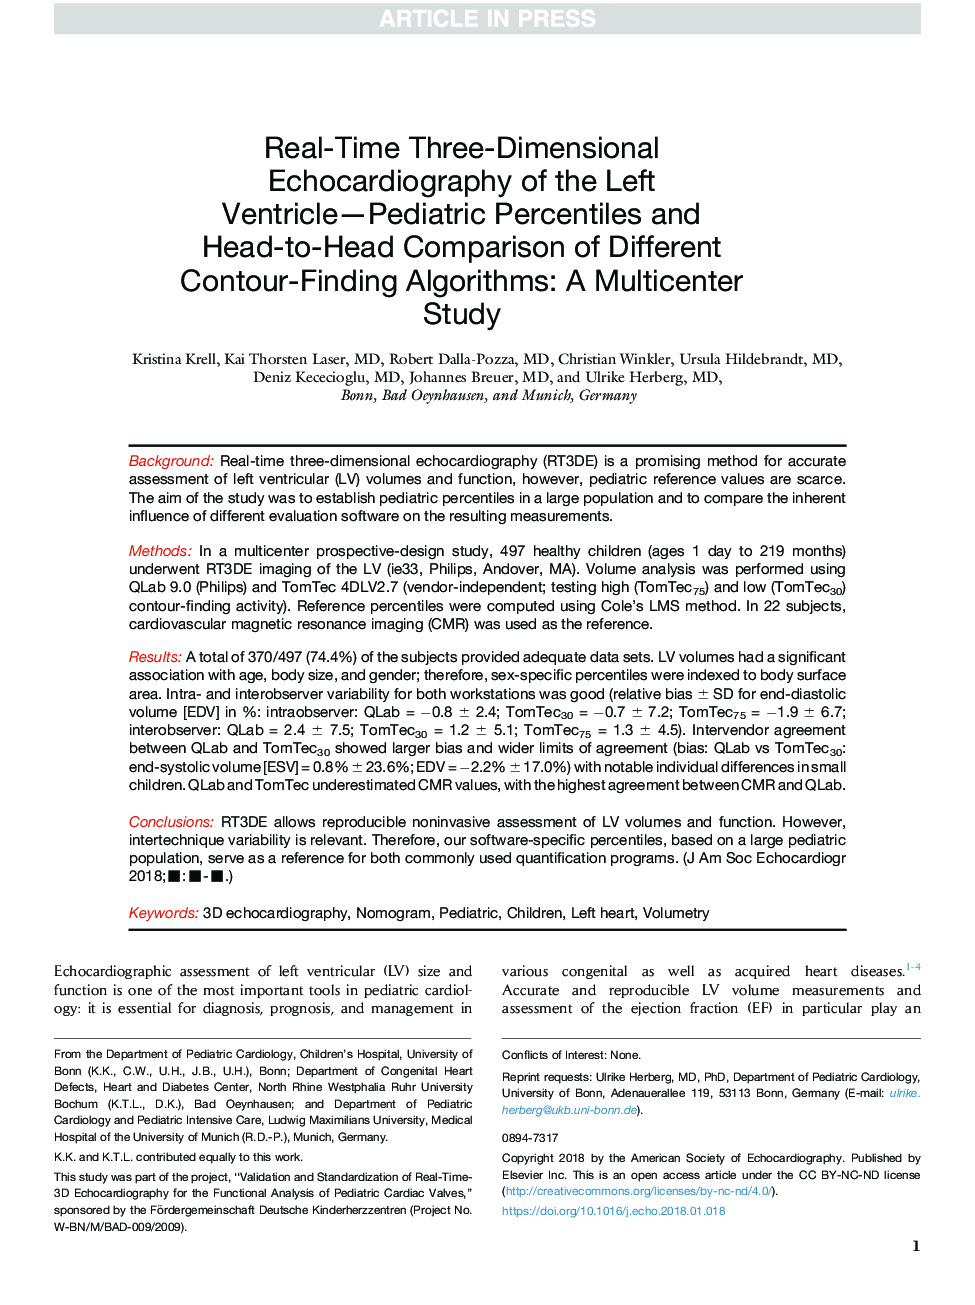 Real-Time Three-Dimensional Echocardiography of the Left Ventricle-Pediatric Percentiles and Head-to-Head Comparison of Different Contour-Finding Algorithms: A Multicenter Study